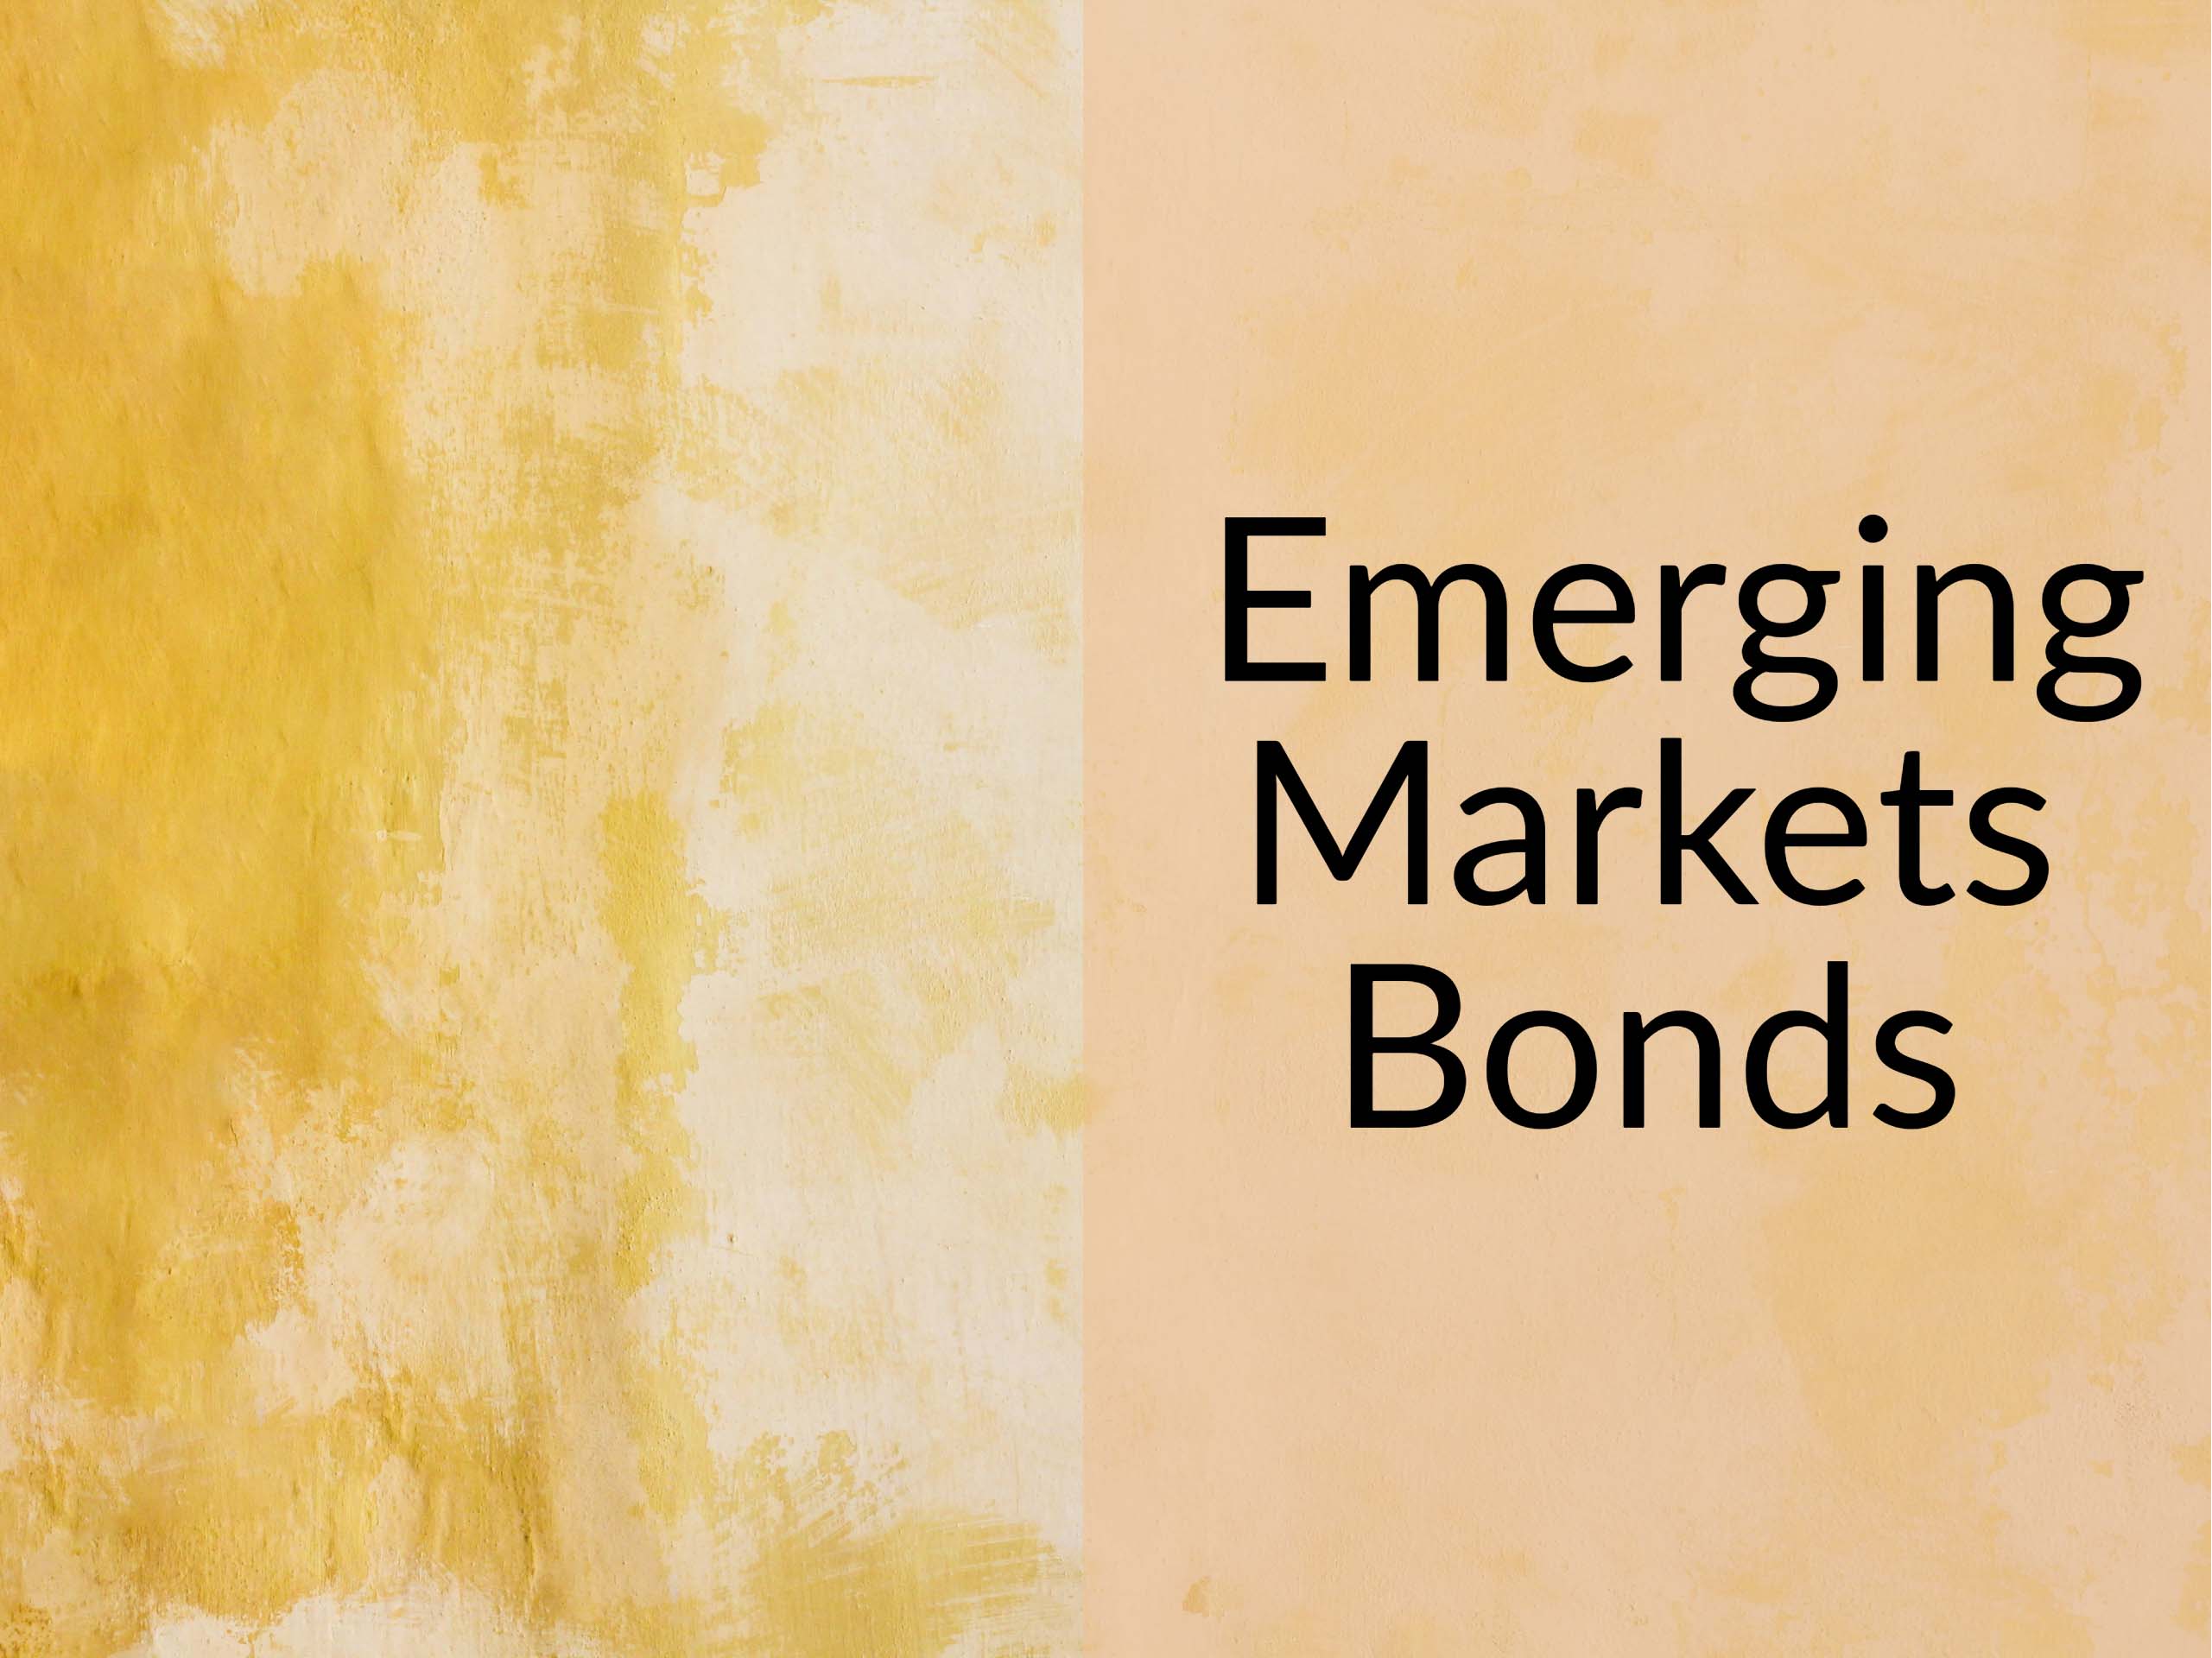 474: Are Emerging Markets Bonds a Once-in-a-Generation Opportunity?